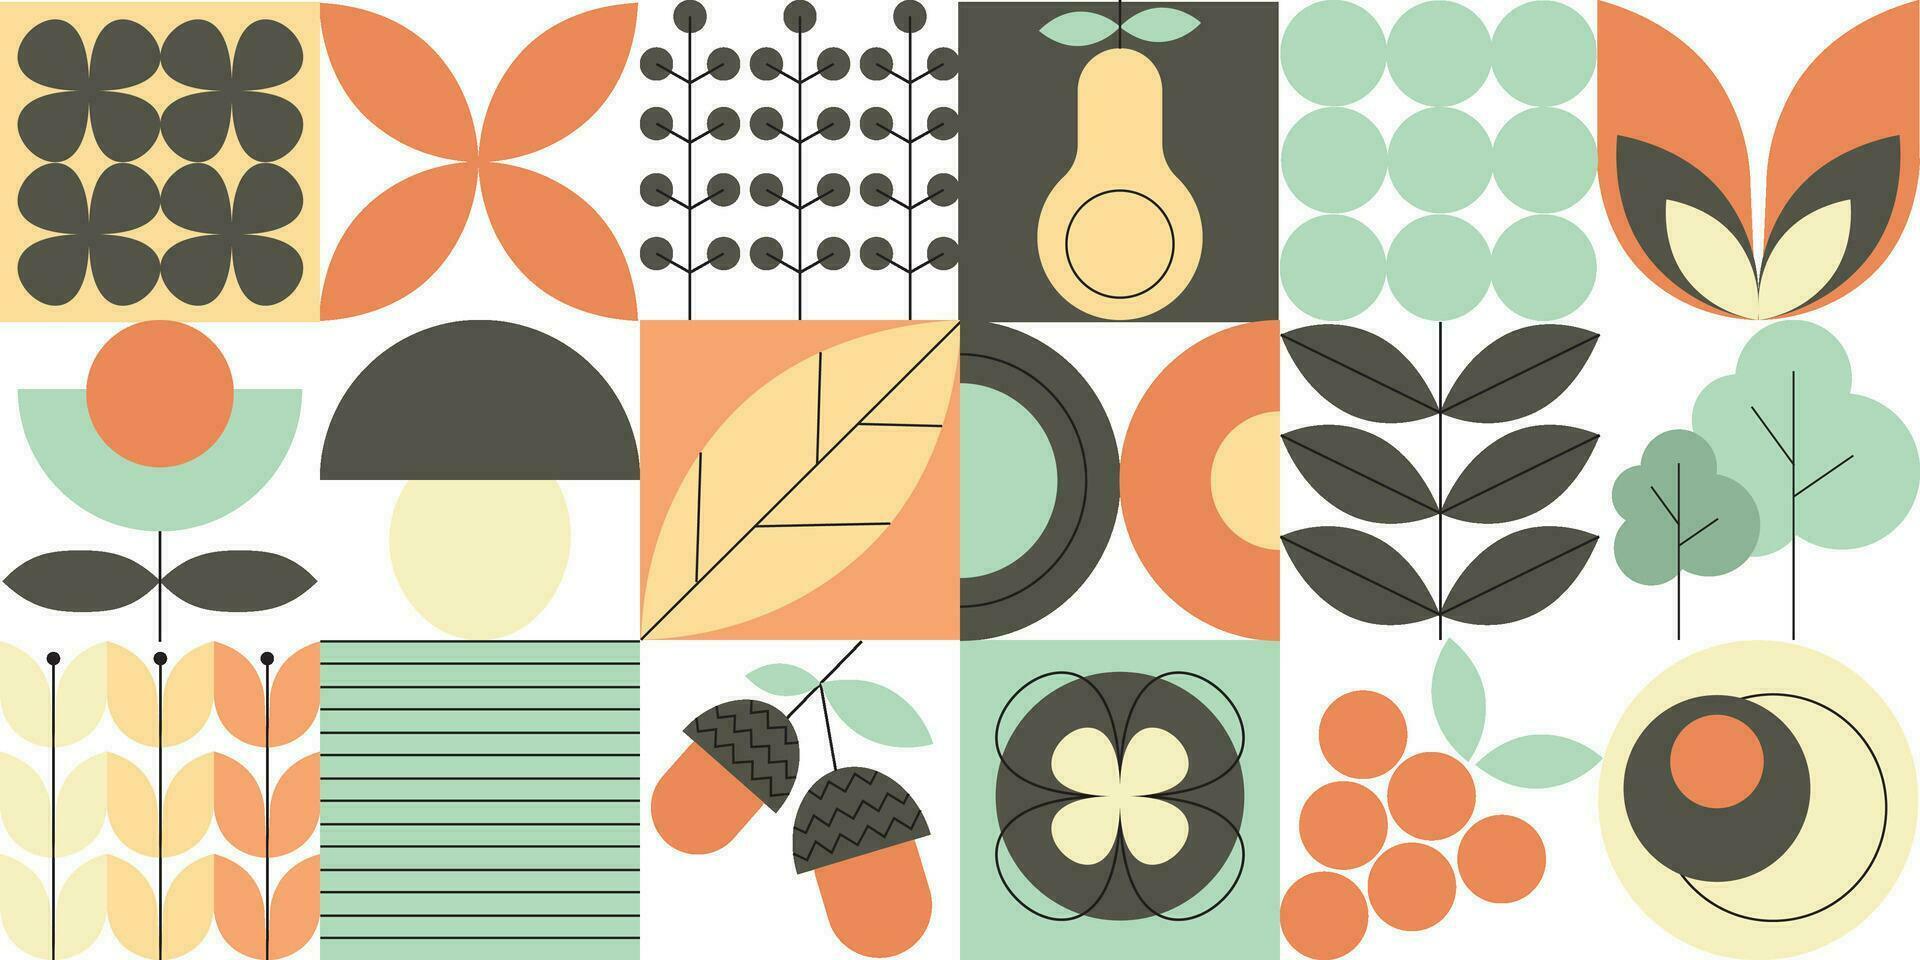 Plants and flowers in Bauhaus style Abstract geometric pattern. Minimal natural fruit plant simple shapes floral poster . Natural organic fruit plants  Vector illustration